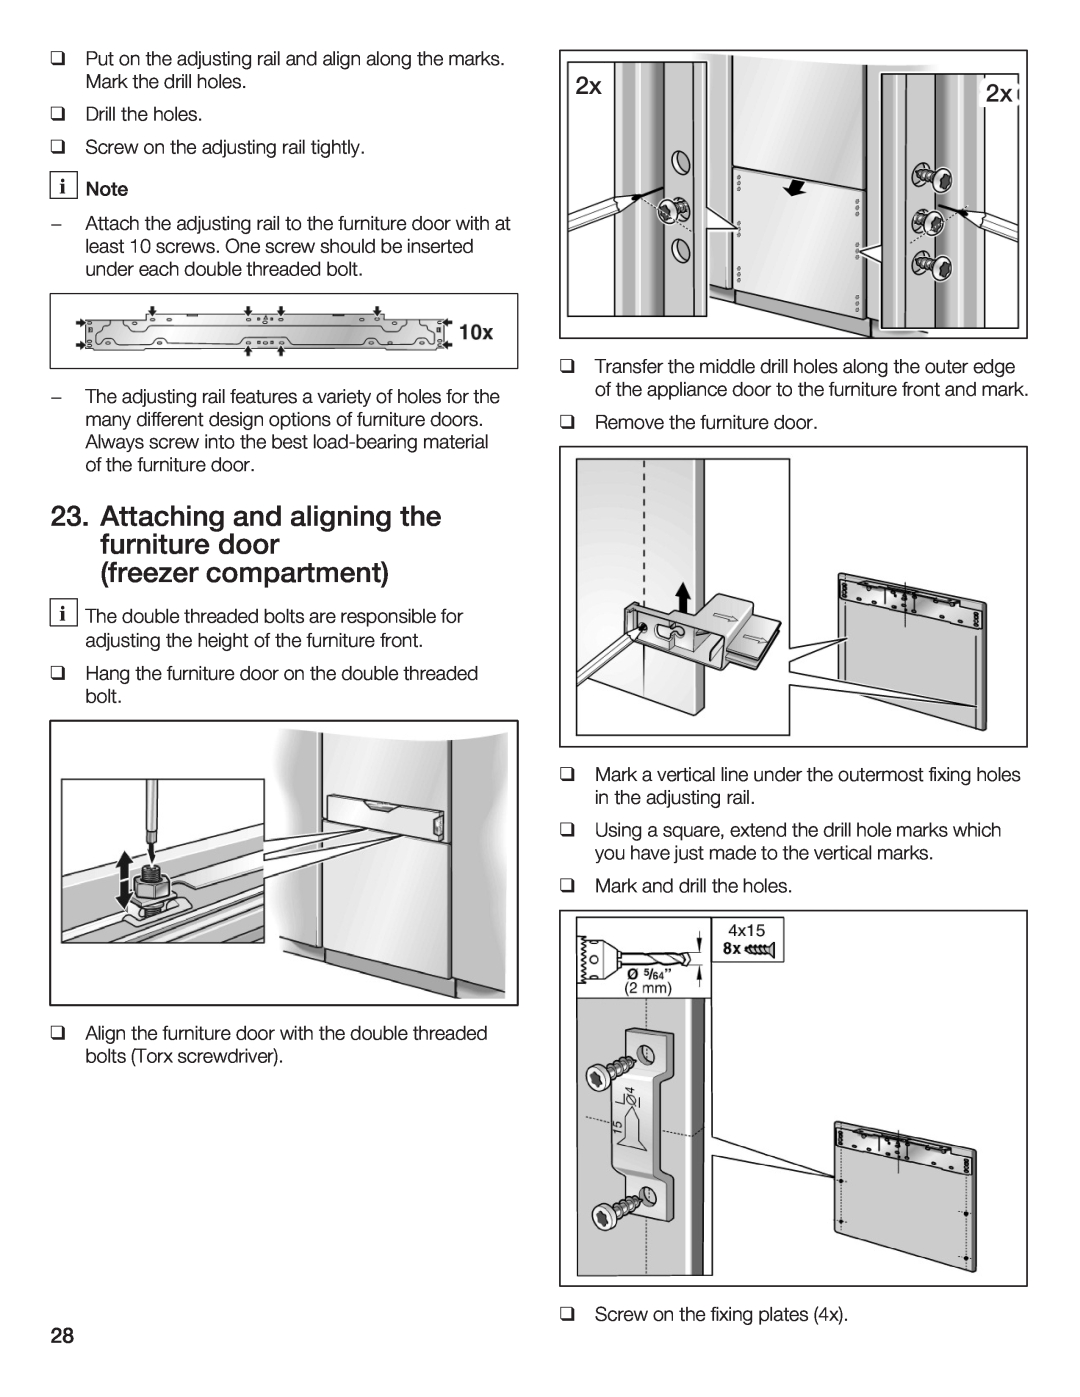 Thermador T36IB70NSP manual Attaching and aligning the furniture door, freezer compartment 